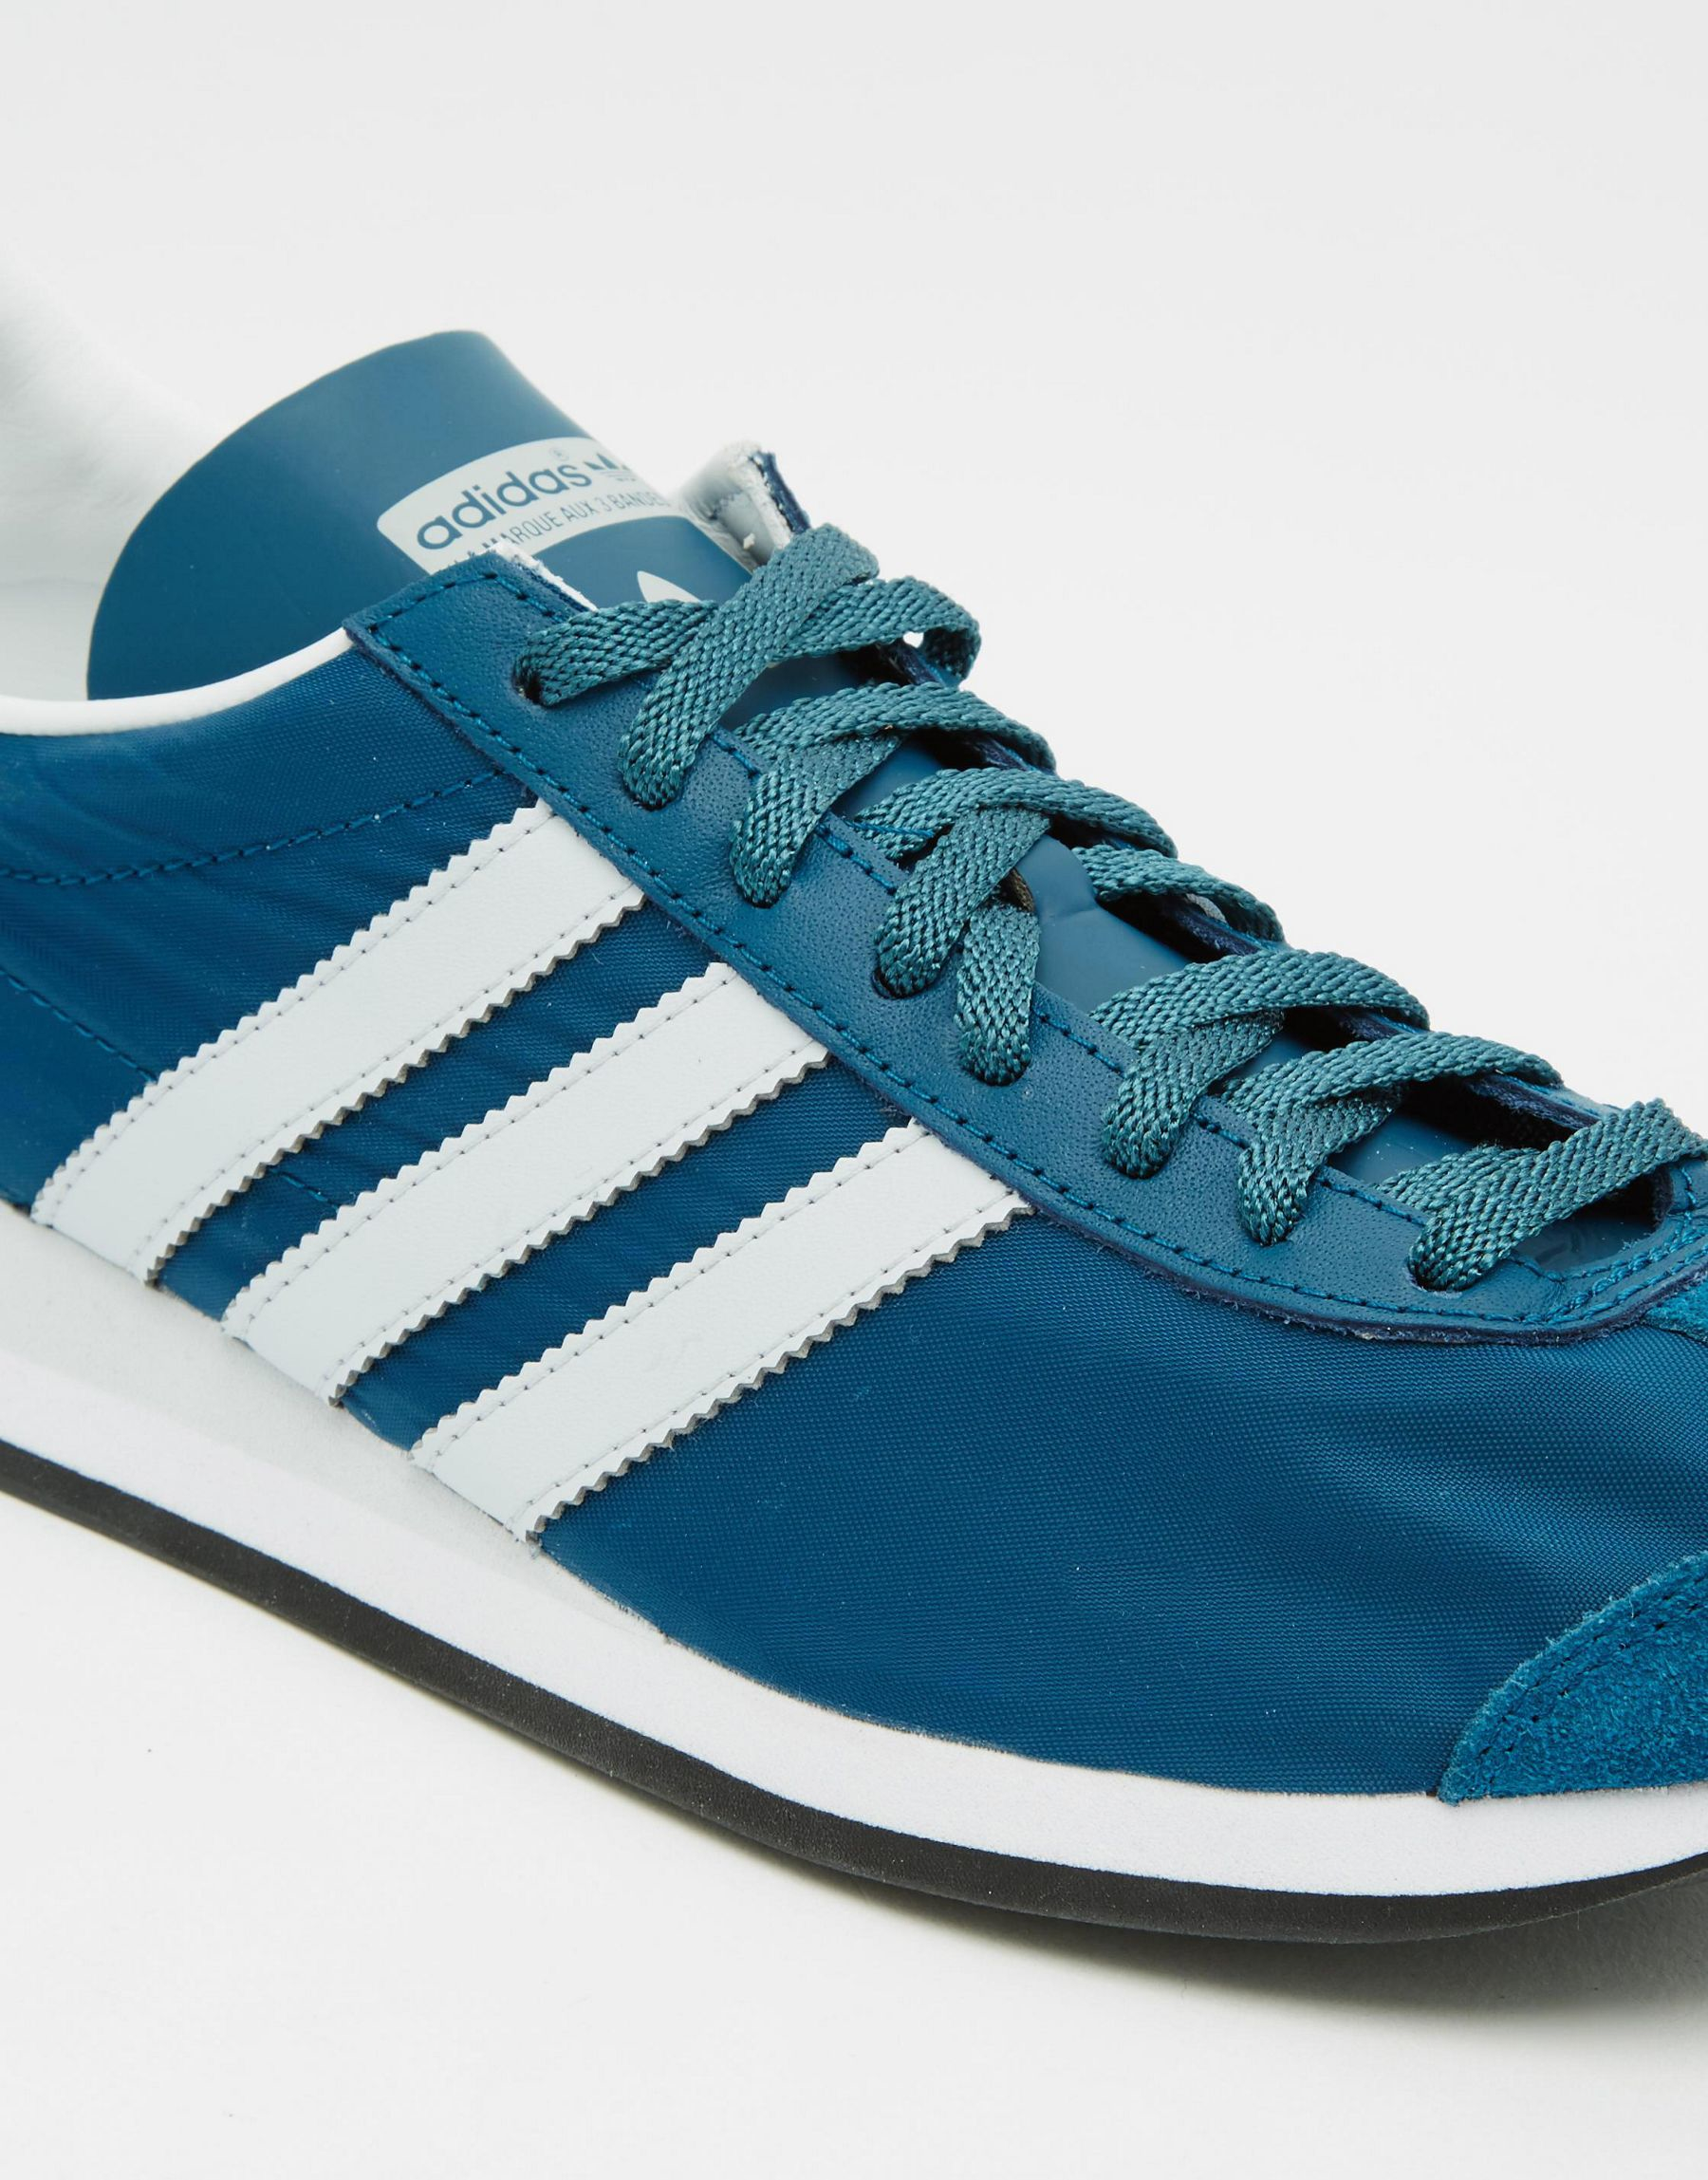 adidas Originals Country Og Trainers in Blue for Men - Lyst